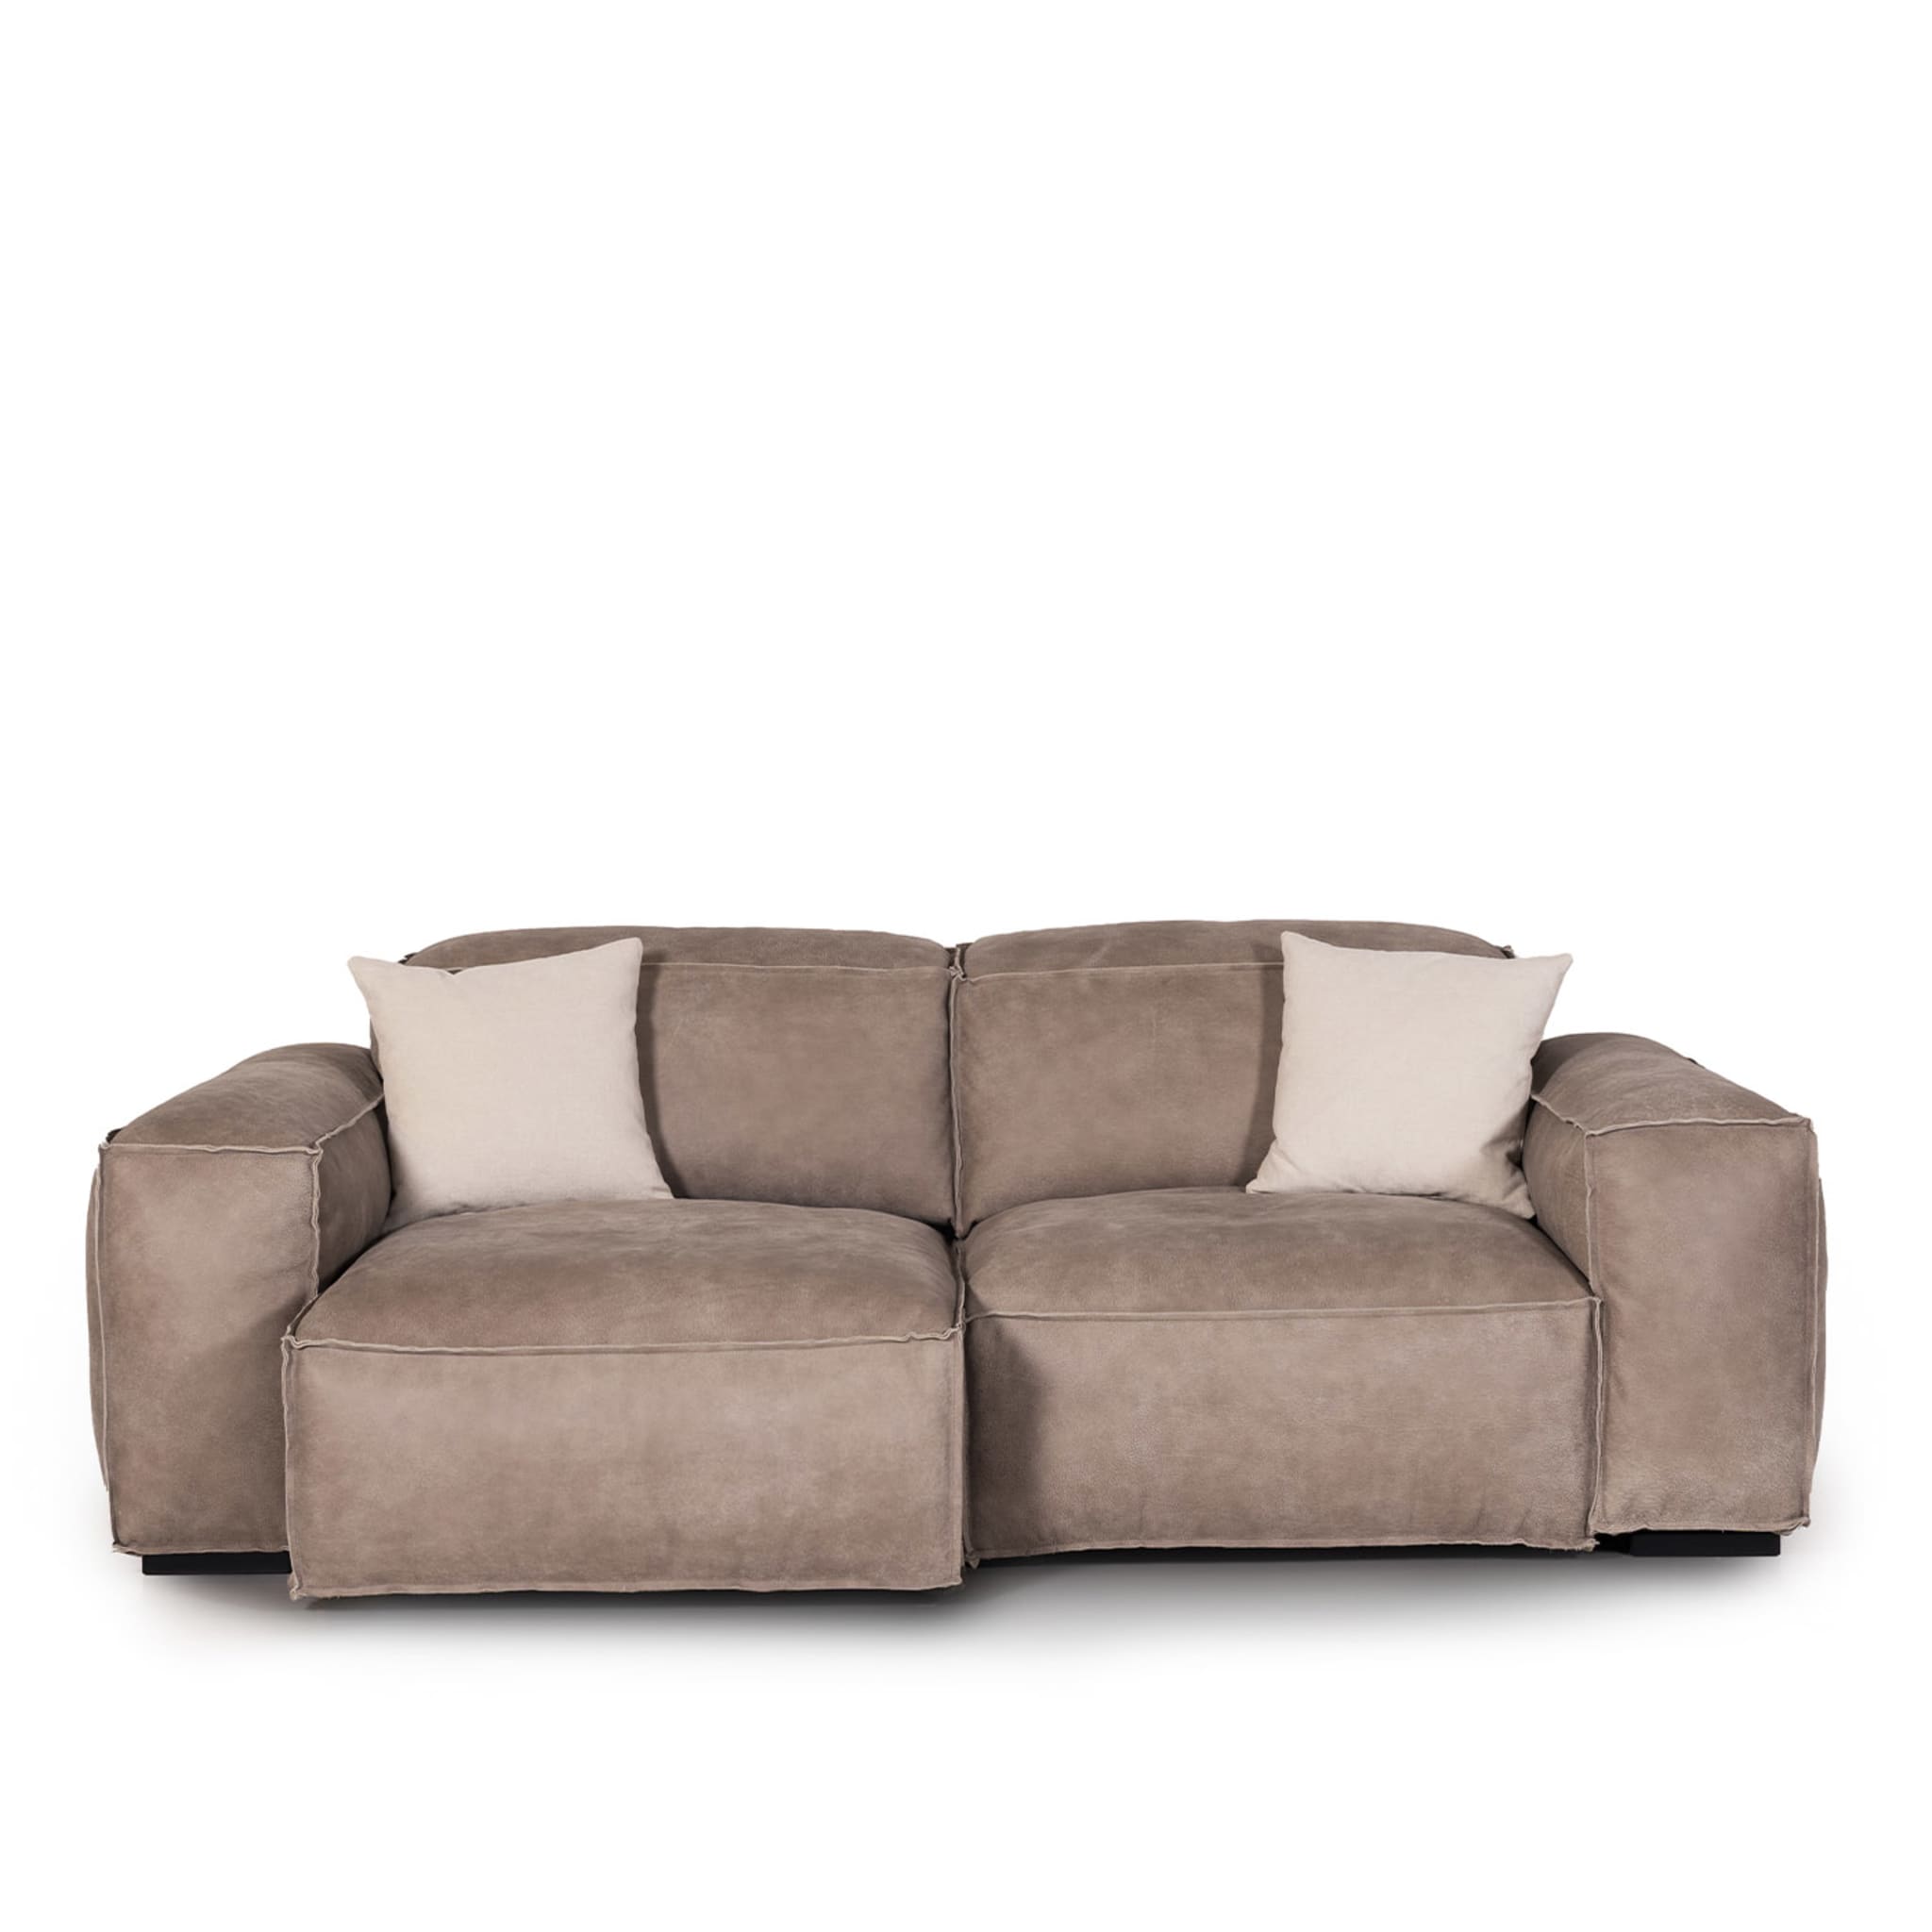 Placido 2 Seater Sofa in Gray Leather  - Alternative view 2